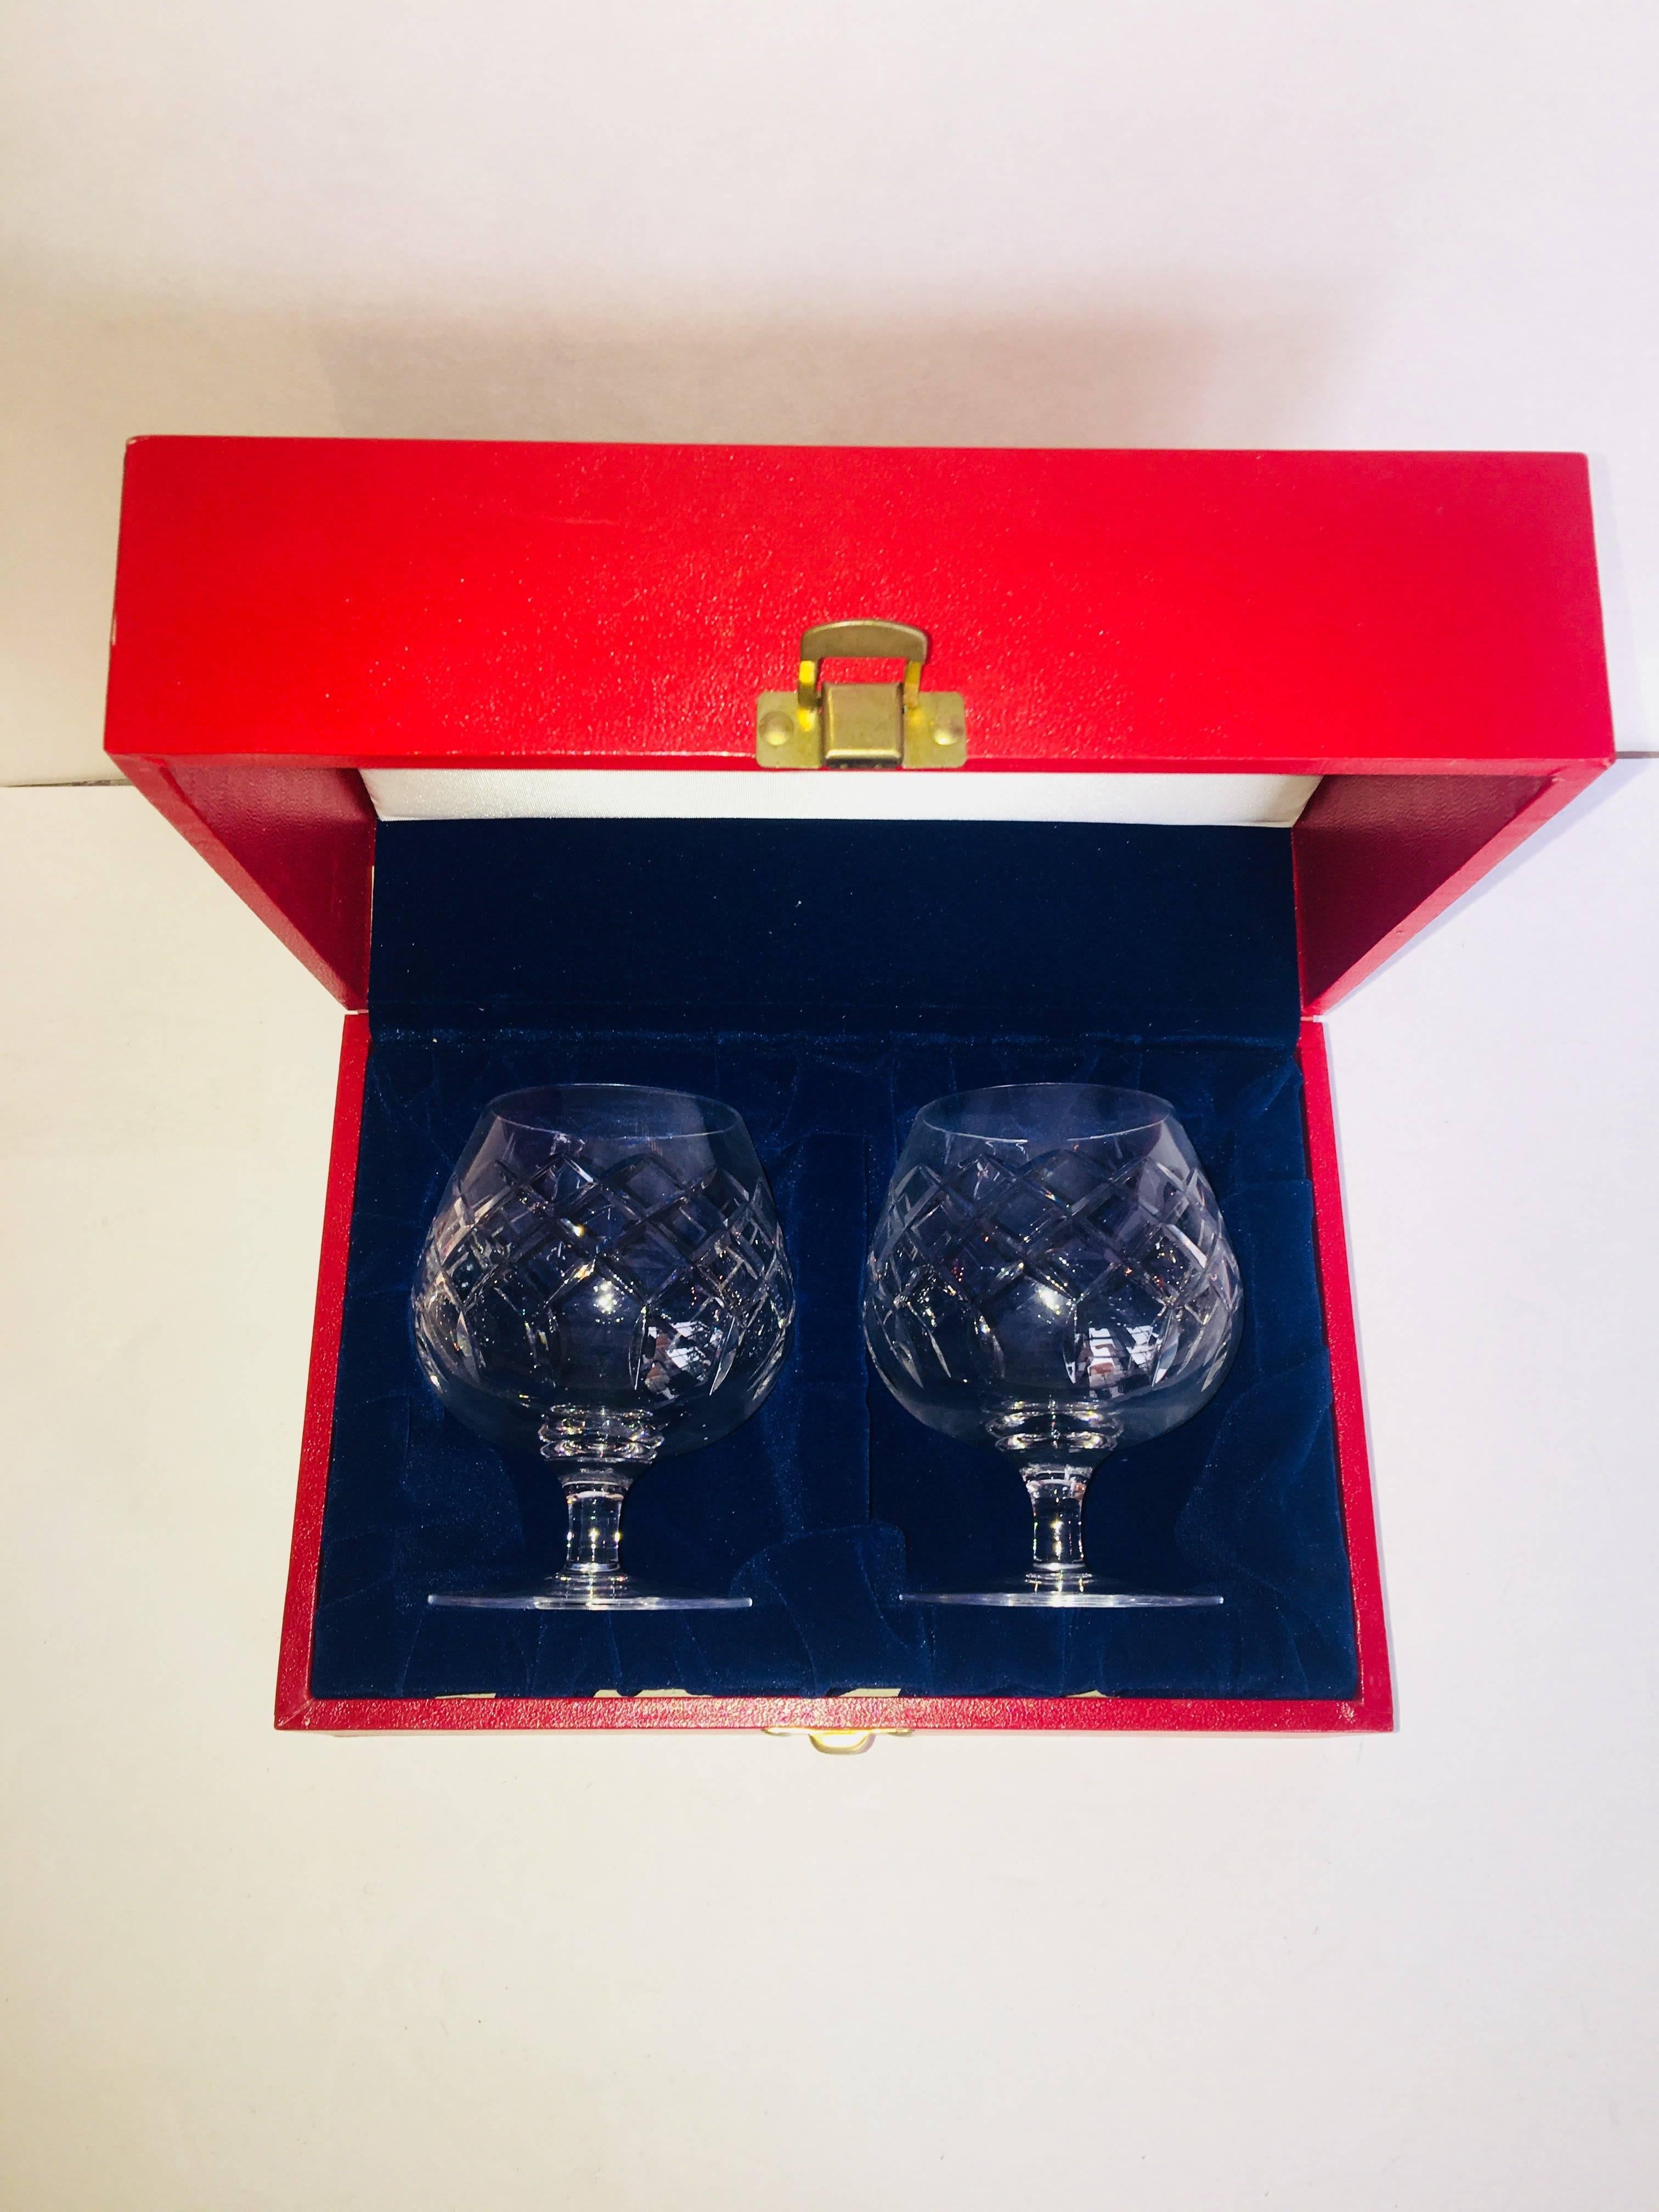 Vintage Cartier brandy snifters in original box with metal clasp and velvet interior. Pair of two etched crystal brandy snifters measuring 4.5